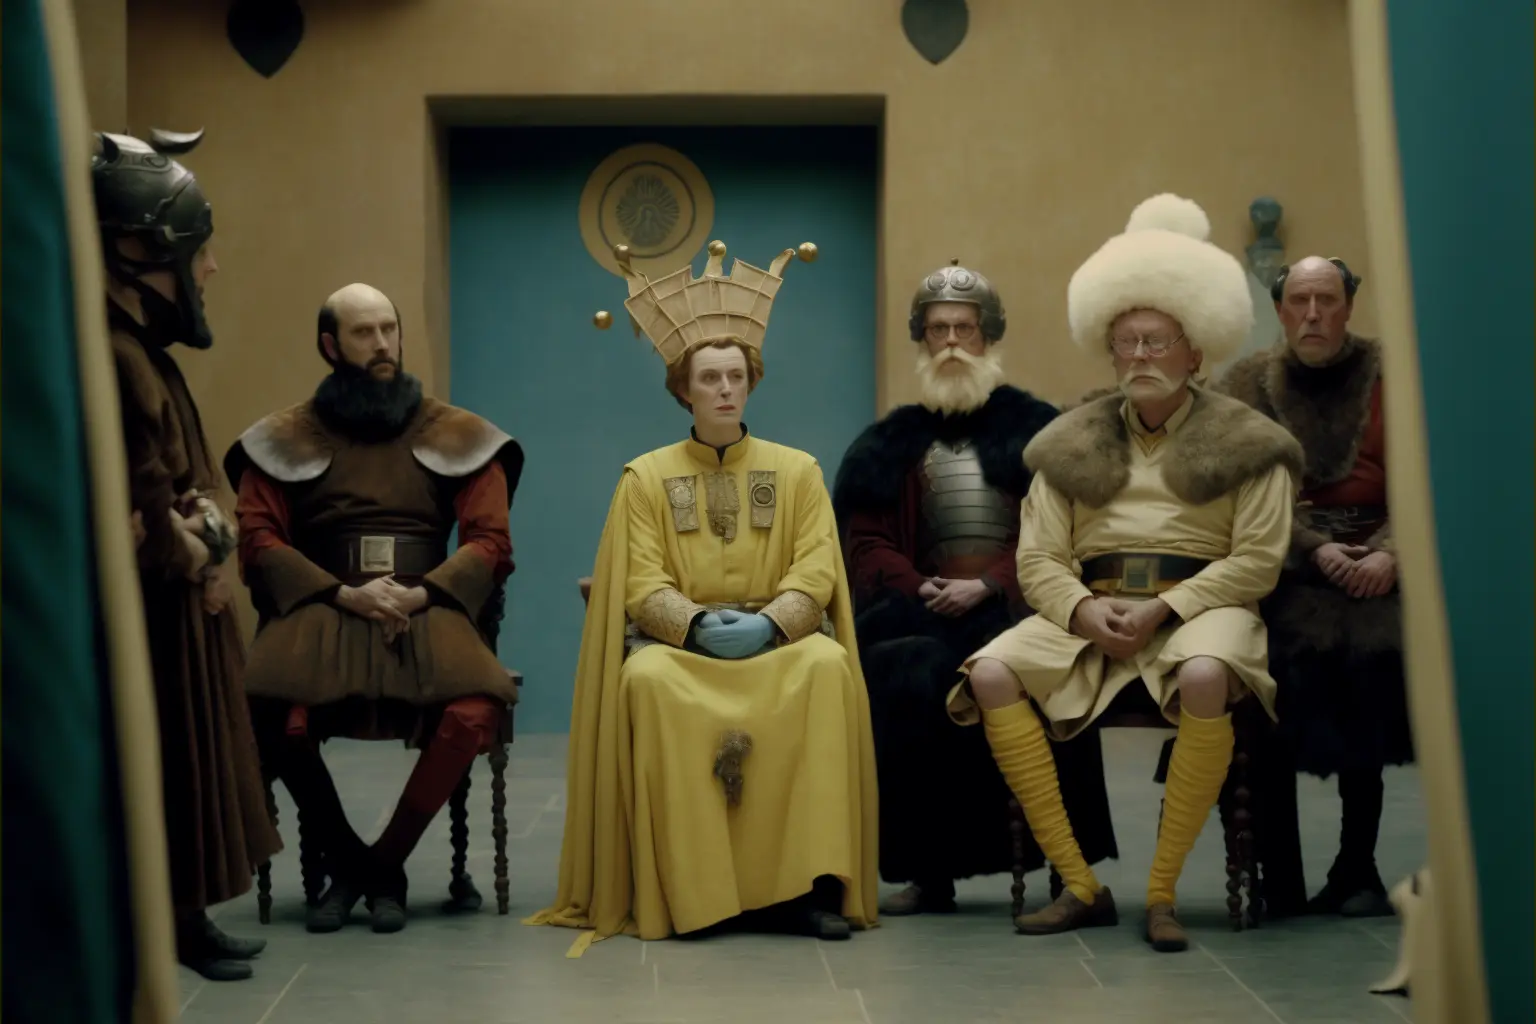 still from film, meeting of the small council game of thrones, directed by Wes Anderson, quirky costume design